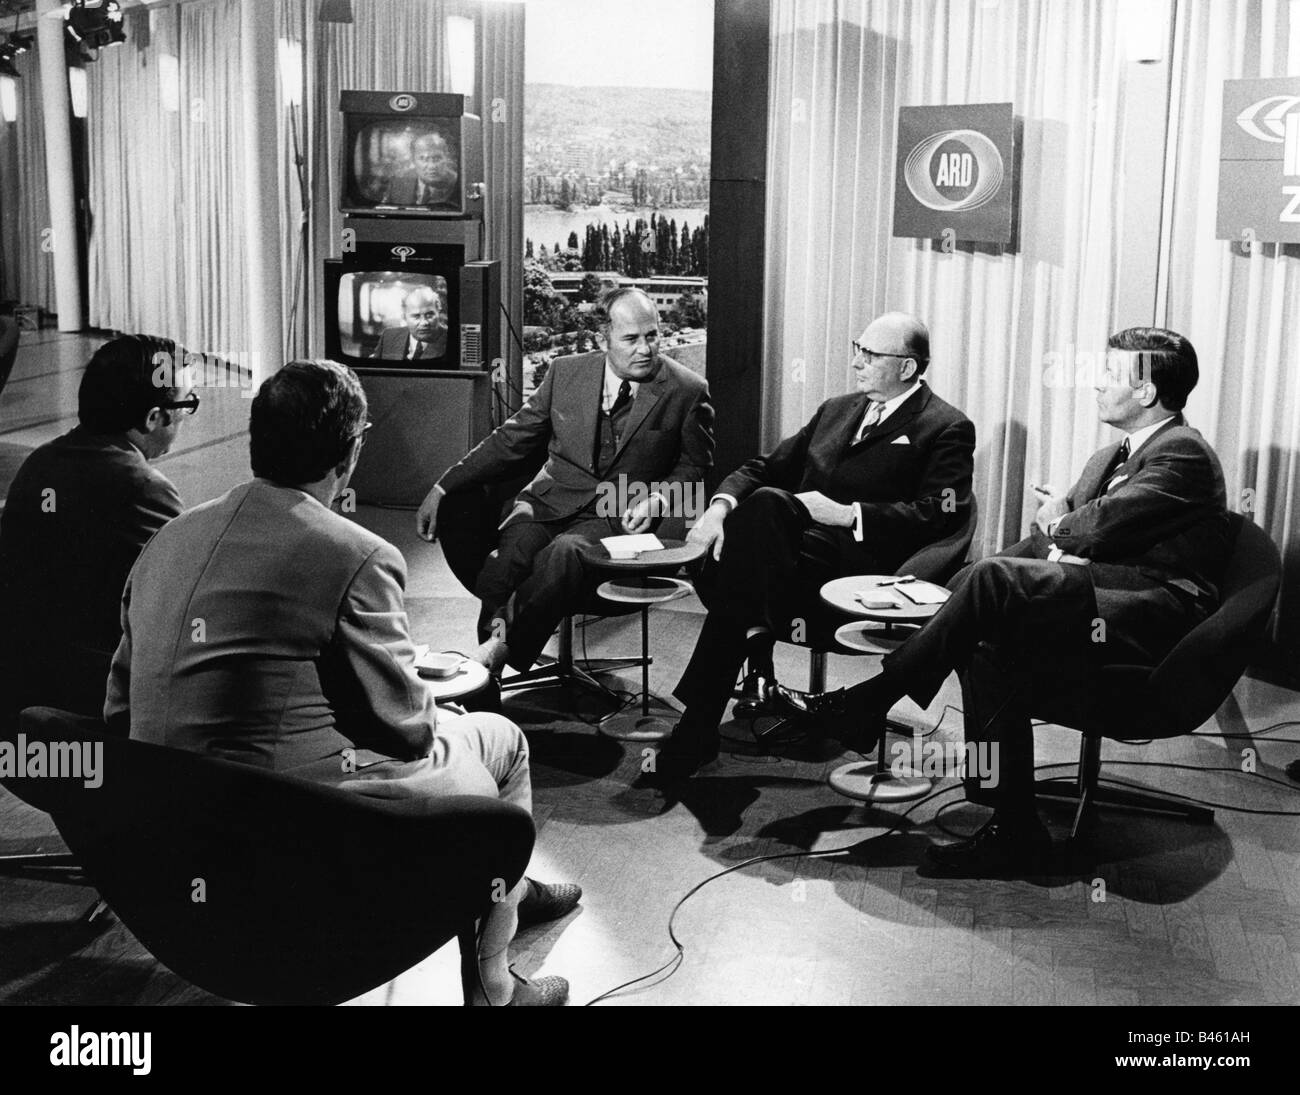 geography / travel, Germany, politics, elections, federal election 1969, Rainer Barzel (CDU), Wolfgang Mischnick (FDP) and Helmut Schmidt (SPD) in the TV studio, Bonn, 28.9.1969, press, journalists, television, politicians, Federal Republic of Germany, 20th century, historic, historical, people, 1960s, Stock Photo